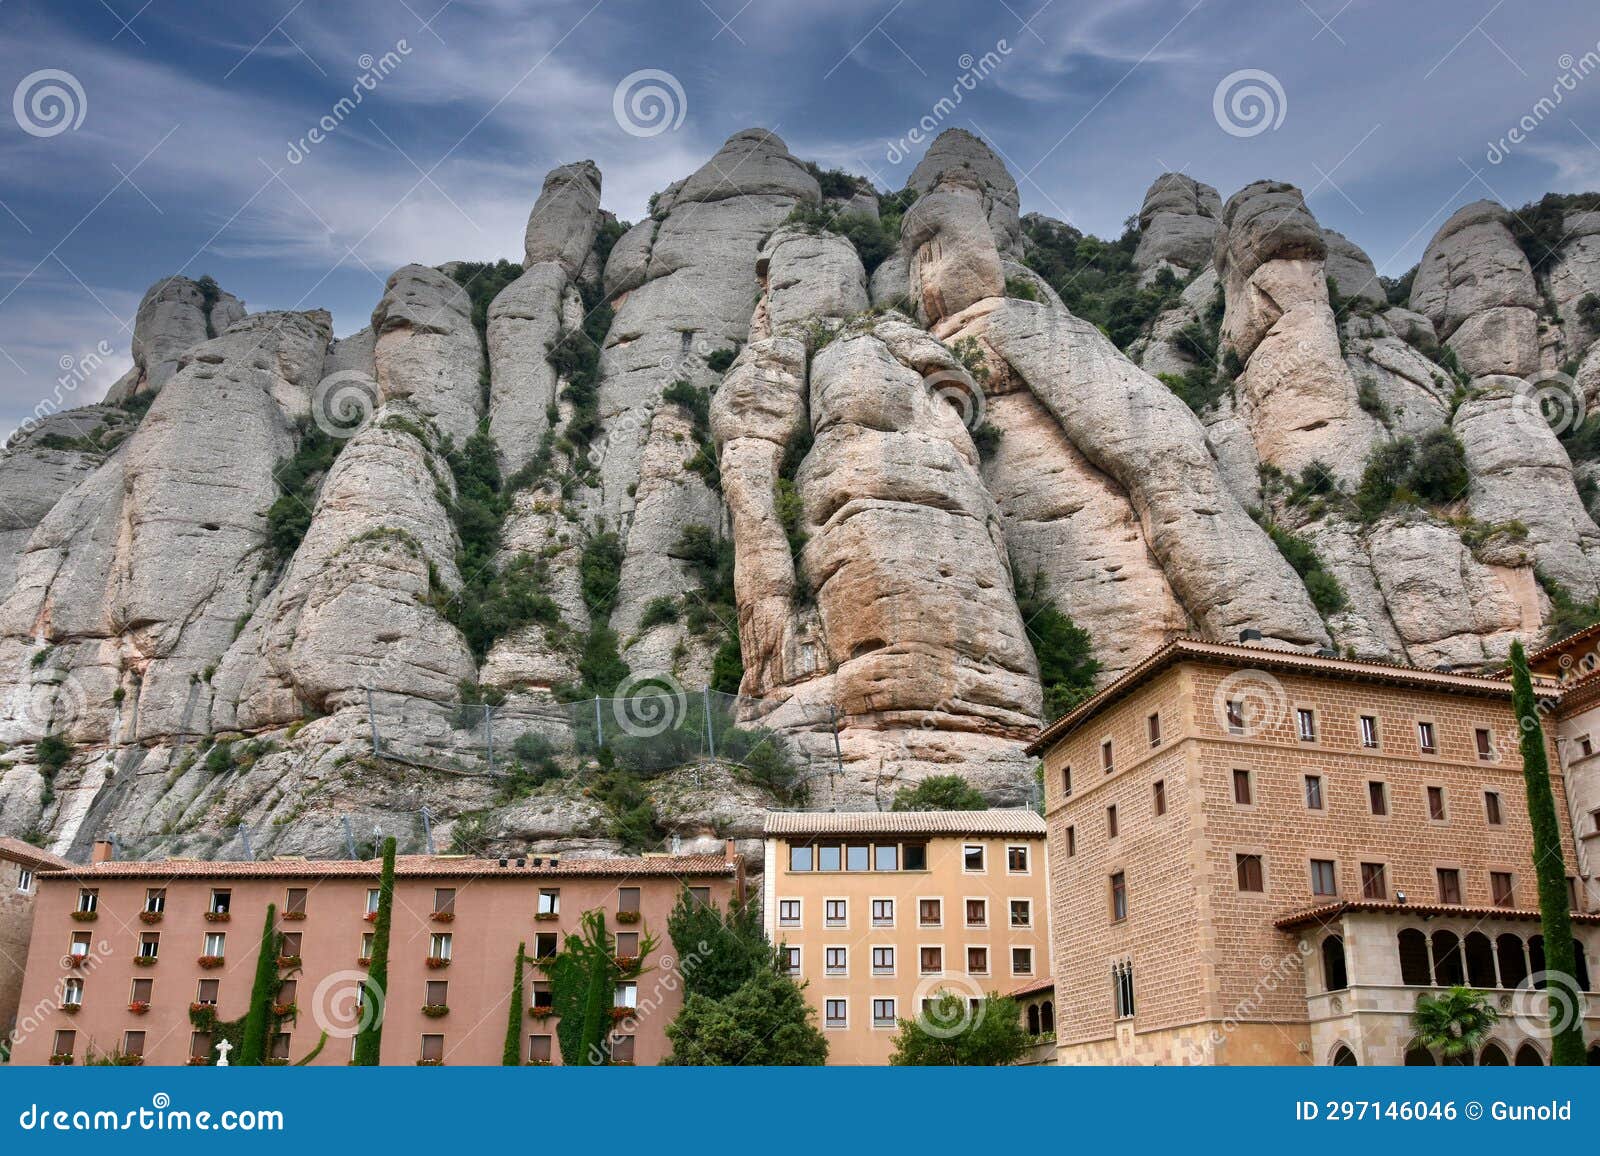 mountain formations and abbey of montserrat at a dark cloudy day